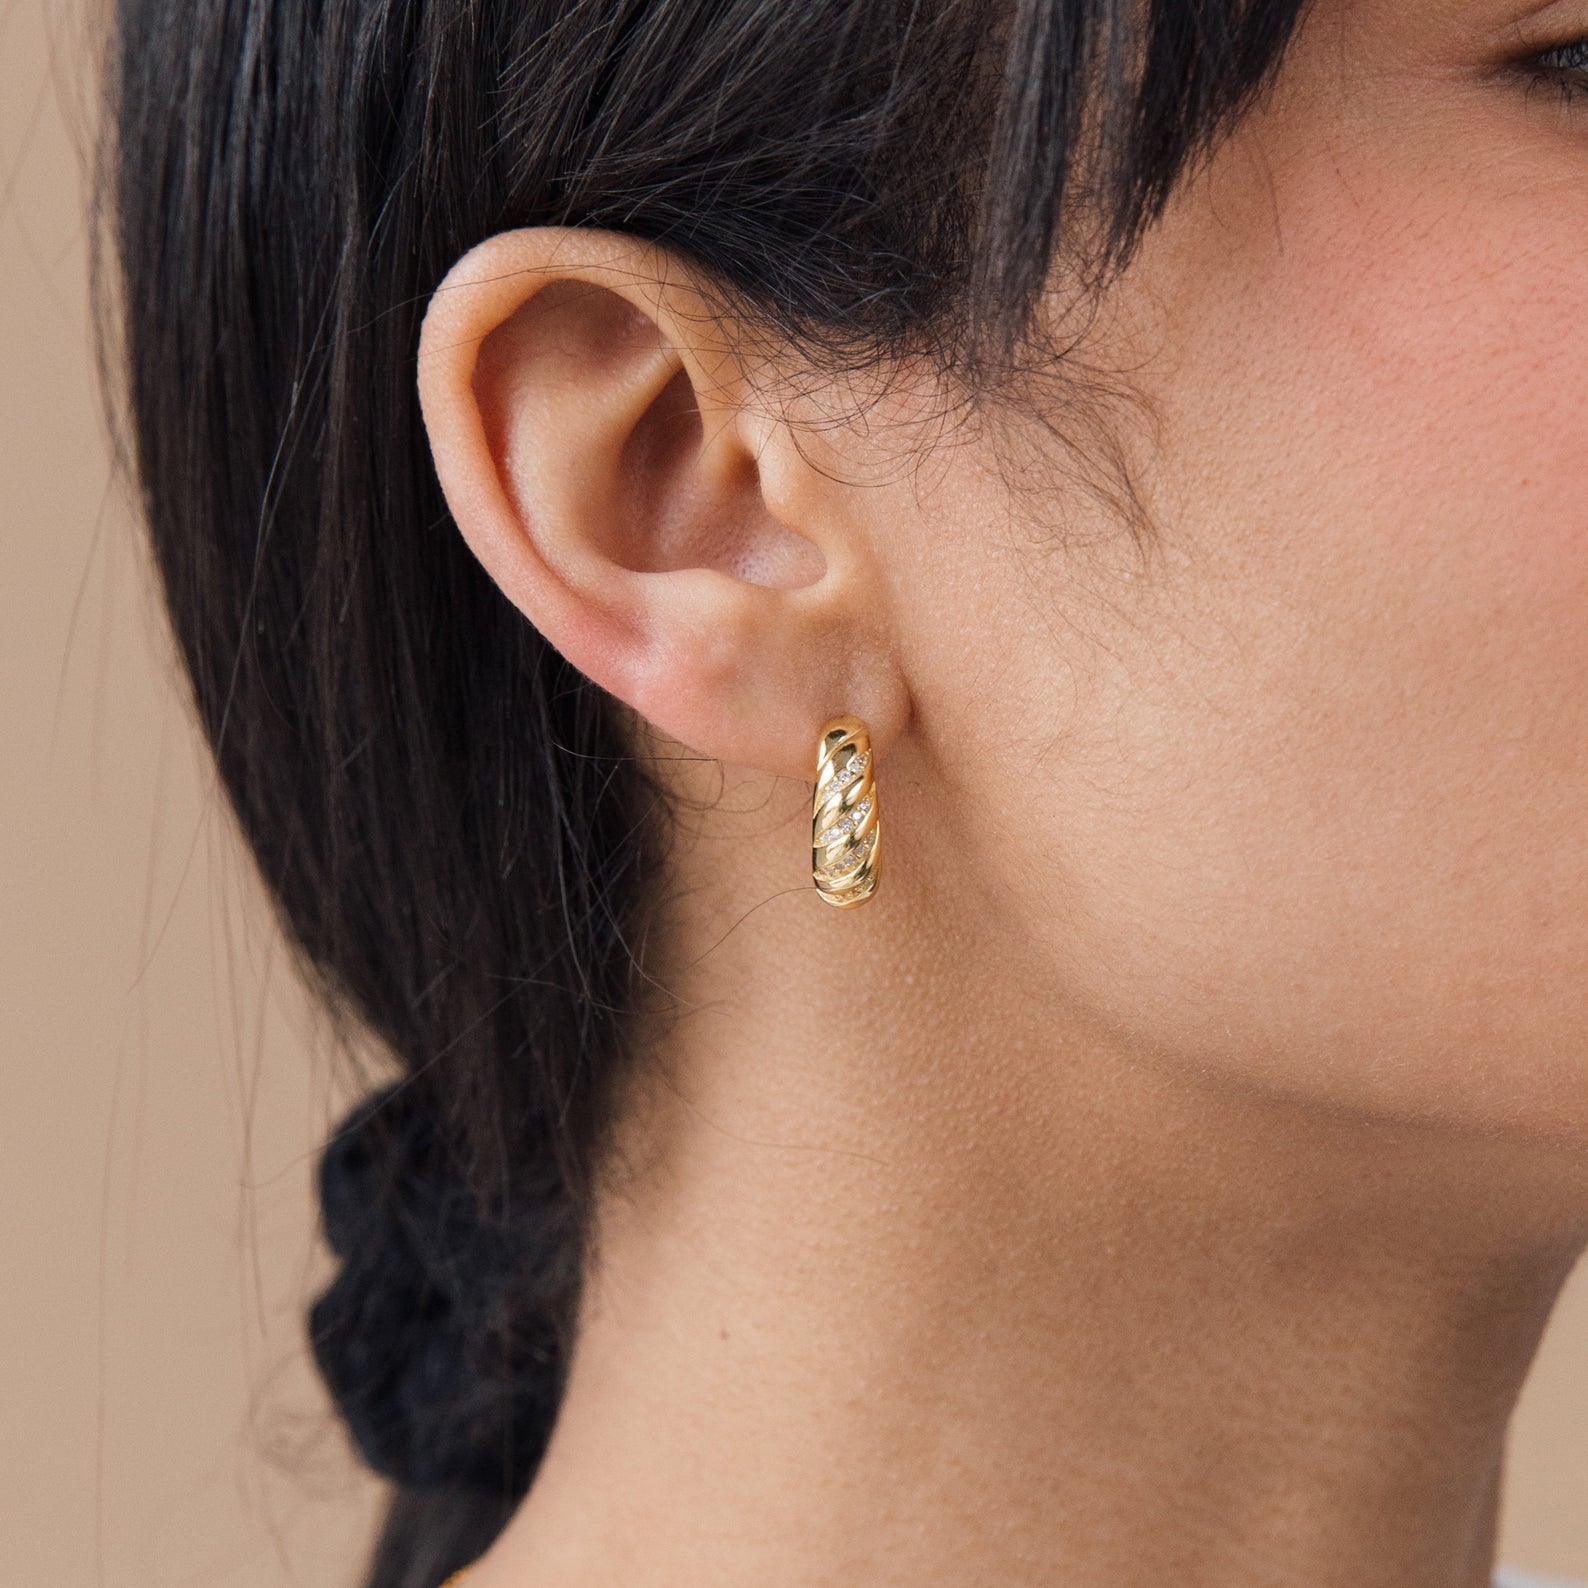 Pave Croissant Earrings